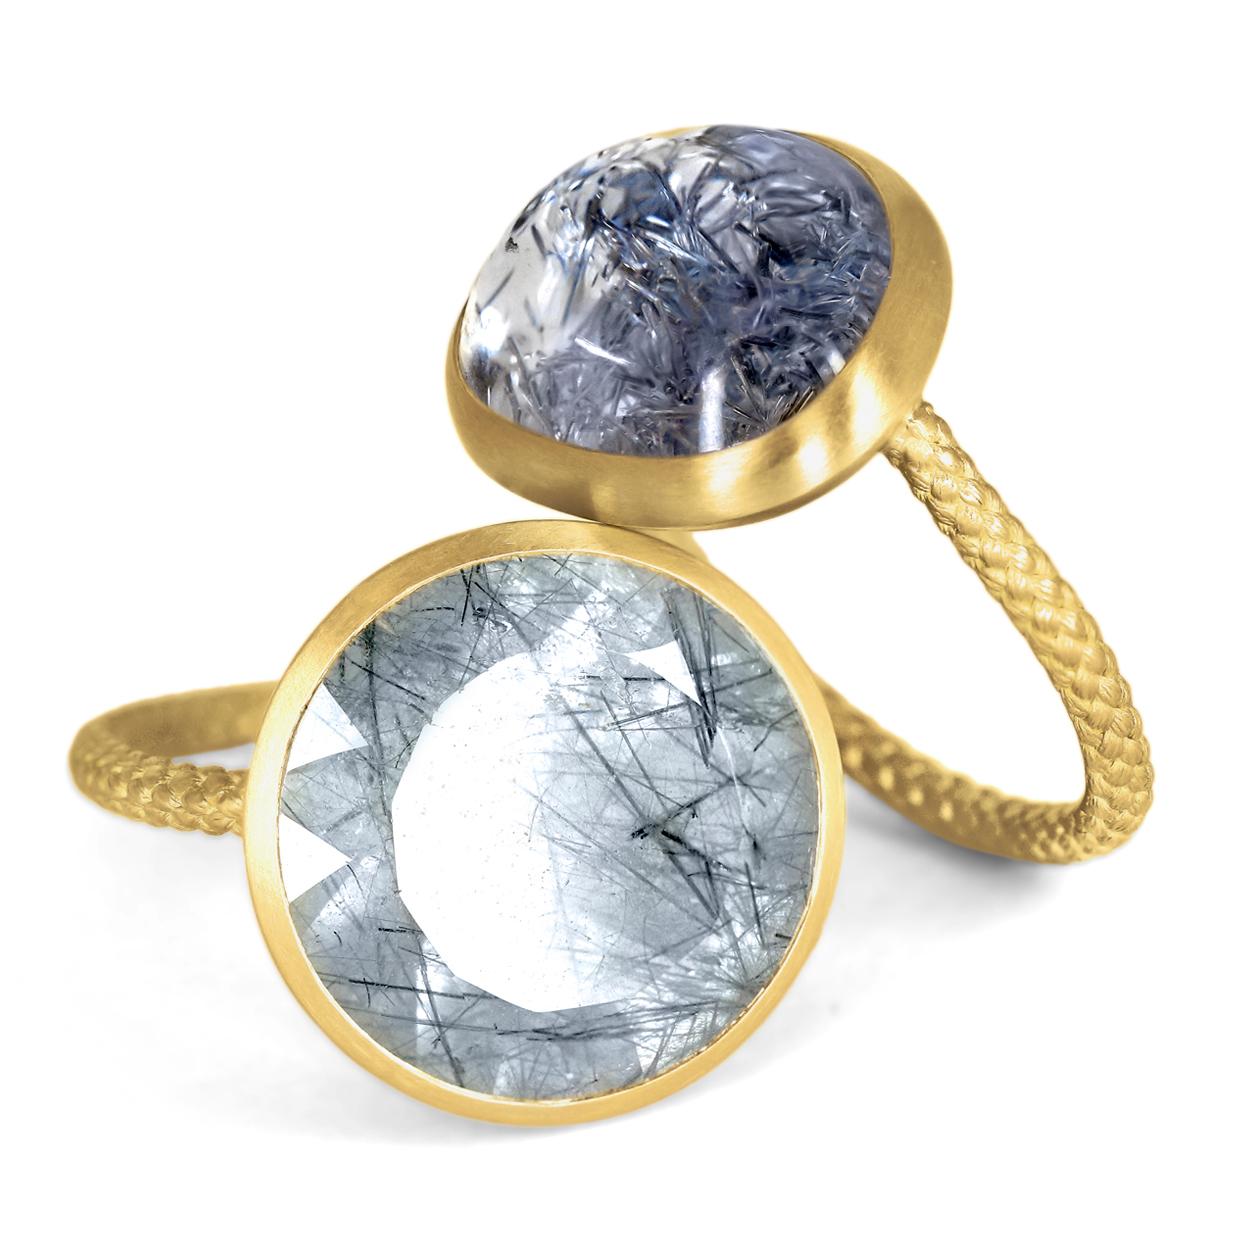 One of a Kind Ring hand-fabricated in Japan in 18k yellow gold by acclaimed jewelry artist Shinobu Marotta (Talkative Marotta) showcasing a stunning natural round 11.14 carat faceted quartz crystal featuring deep blue indicolite tourmaline needles